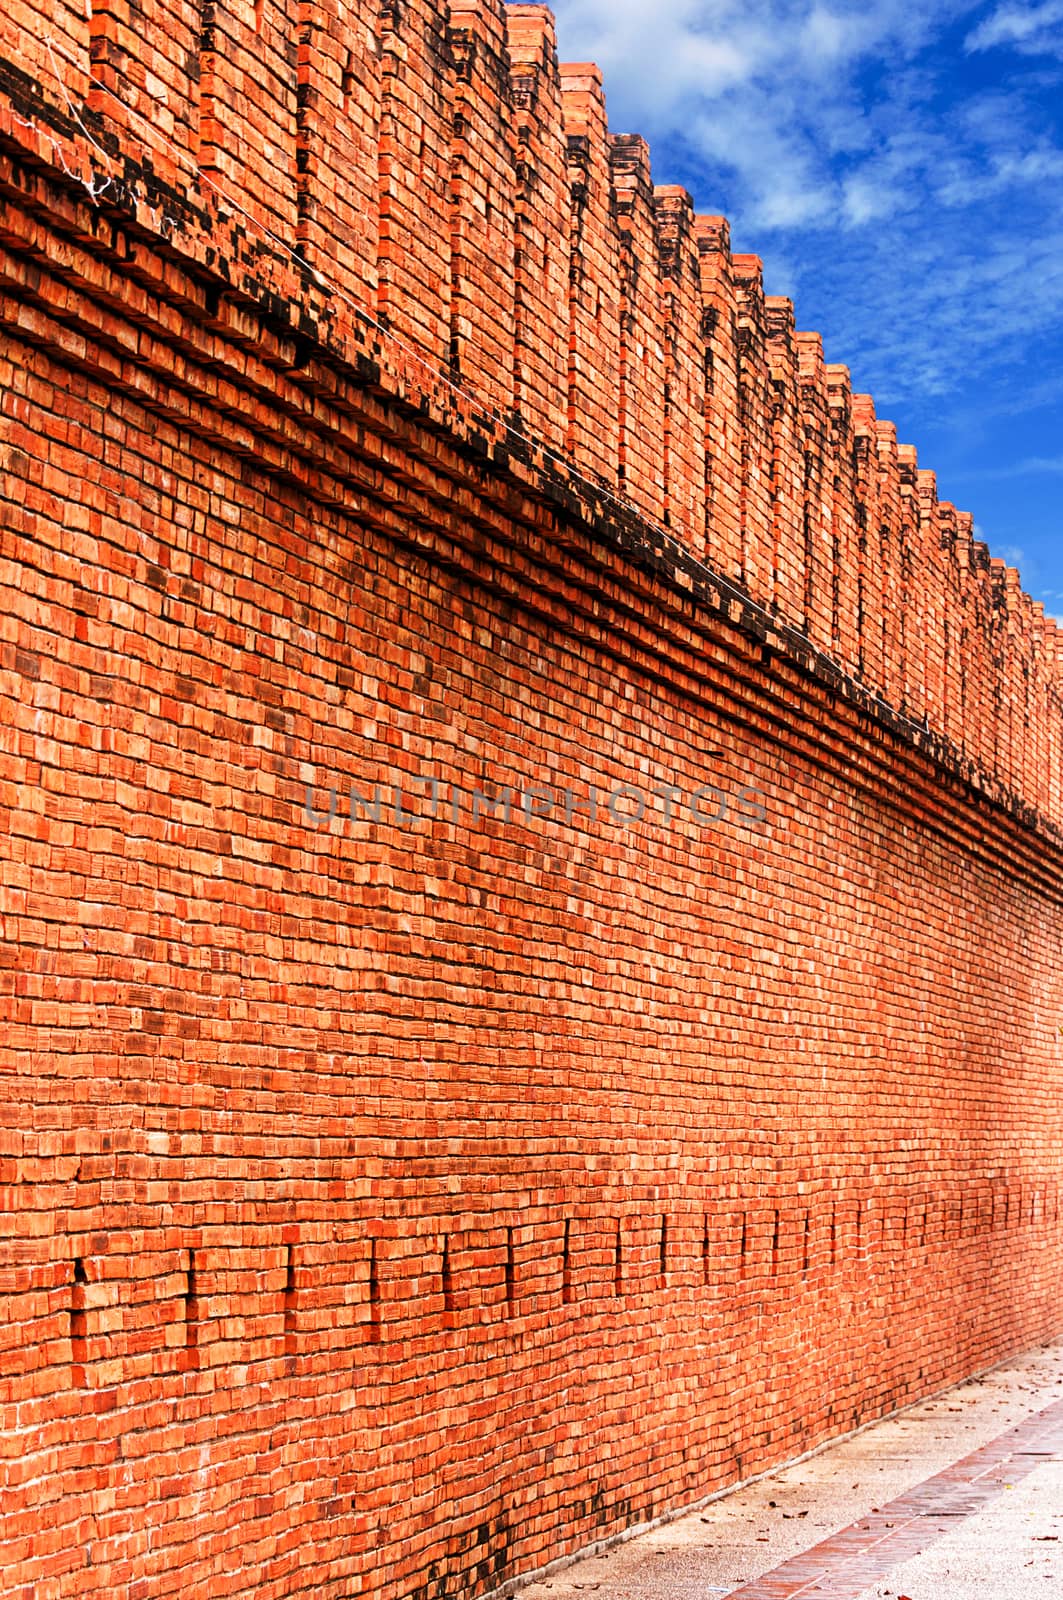 Brick wall of the ancient on blue sky